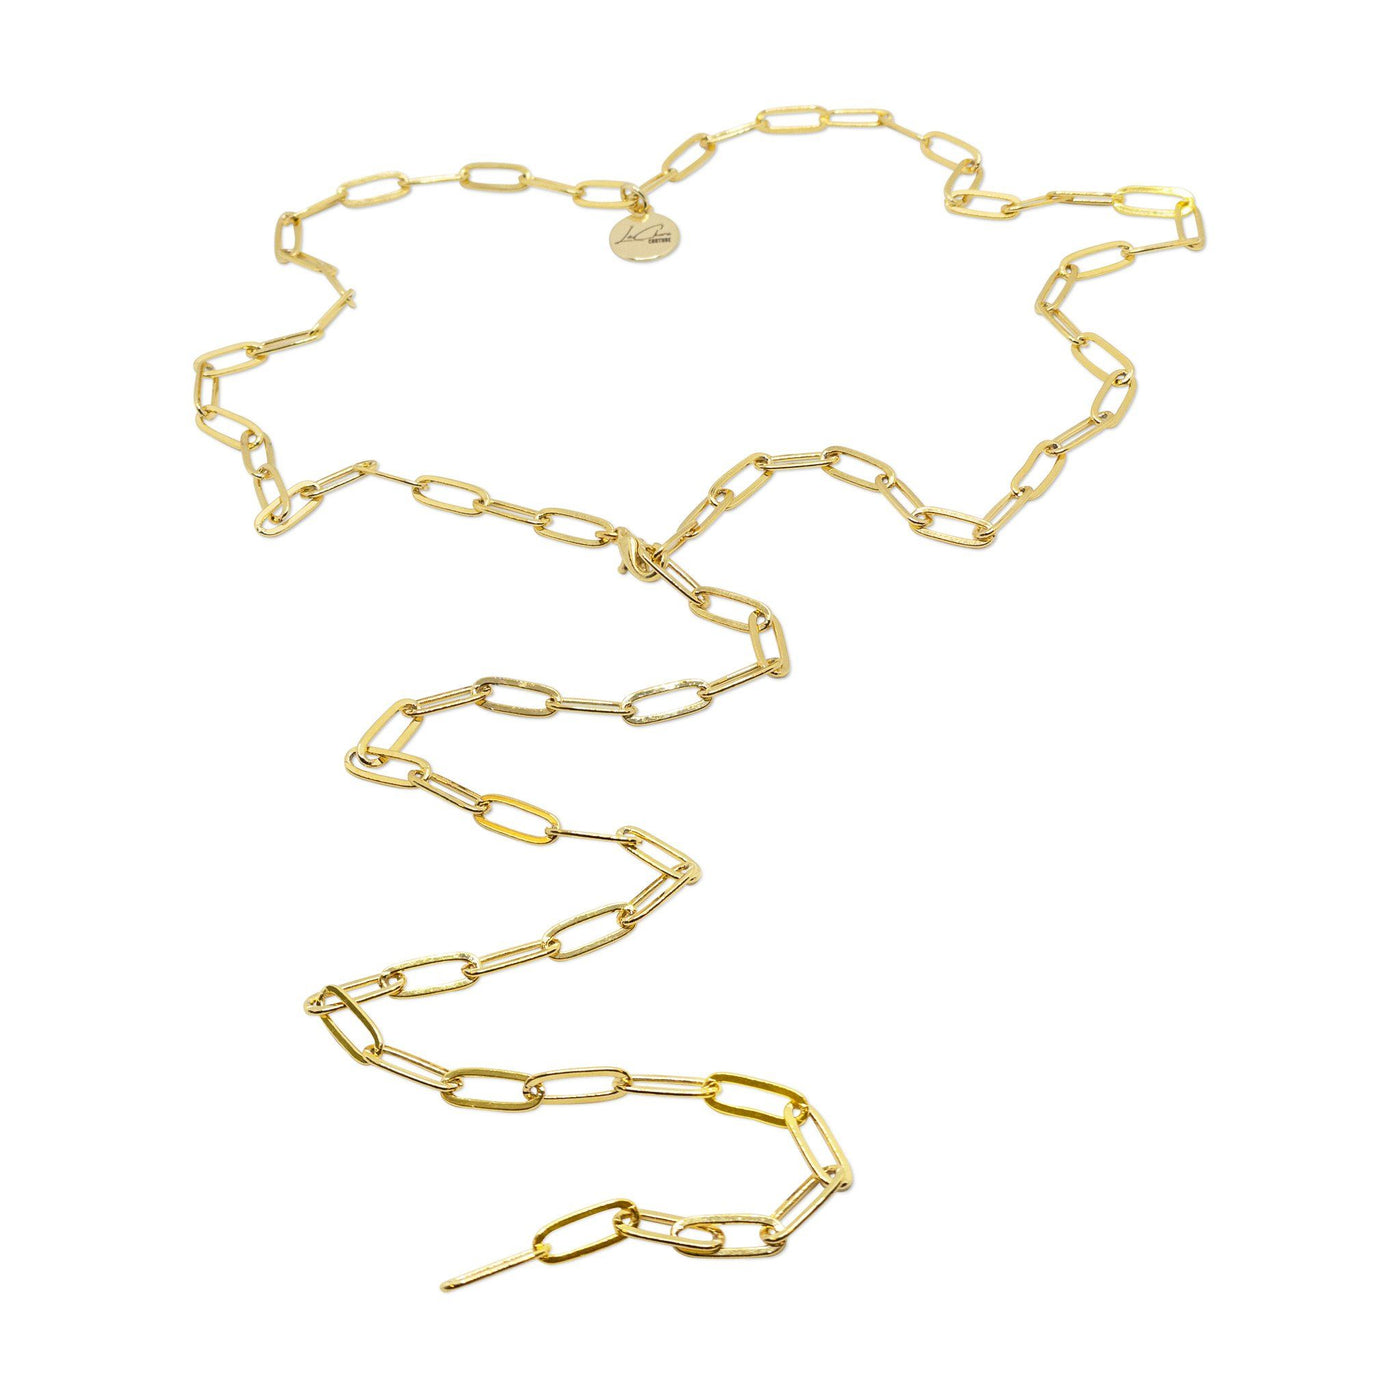 Long Lock Charm Necklace LaCkore Couture